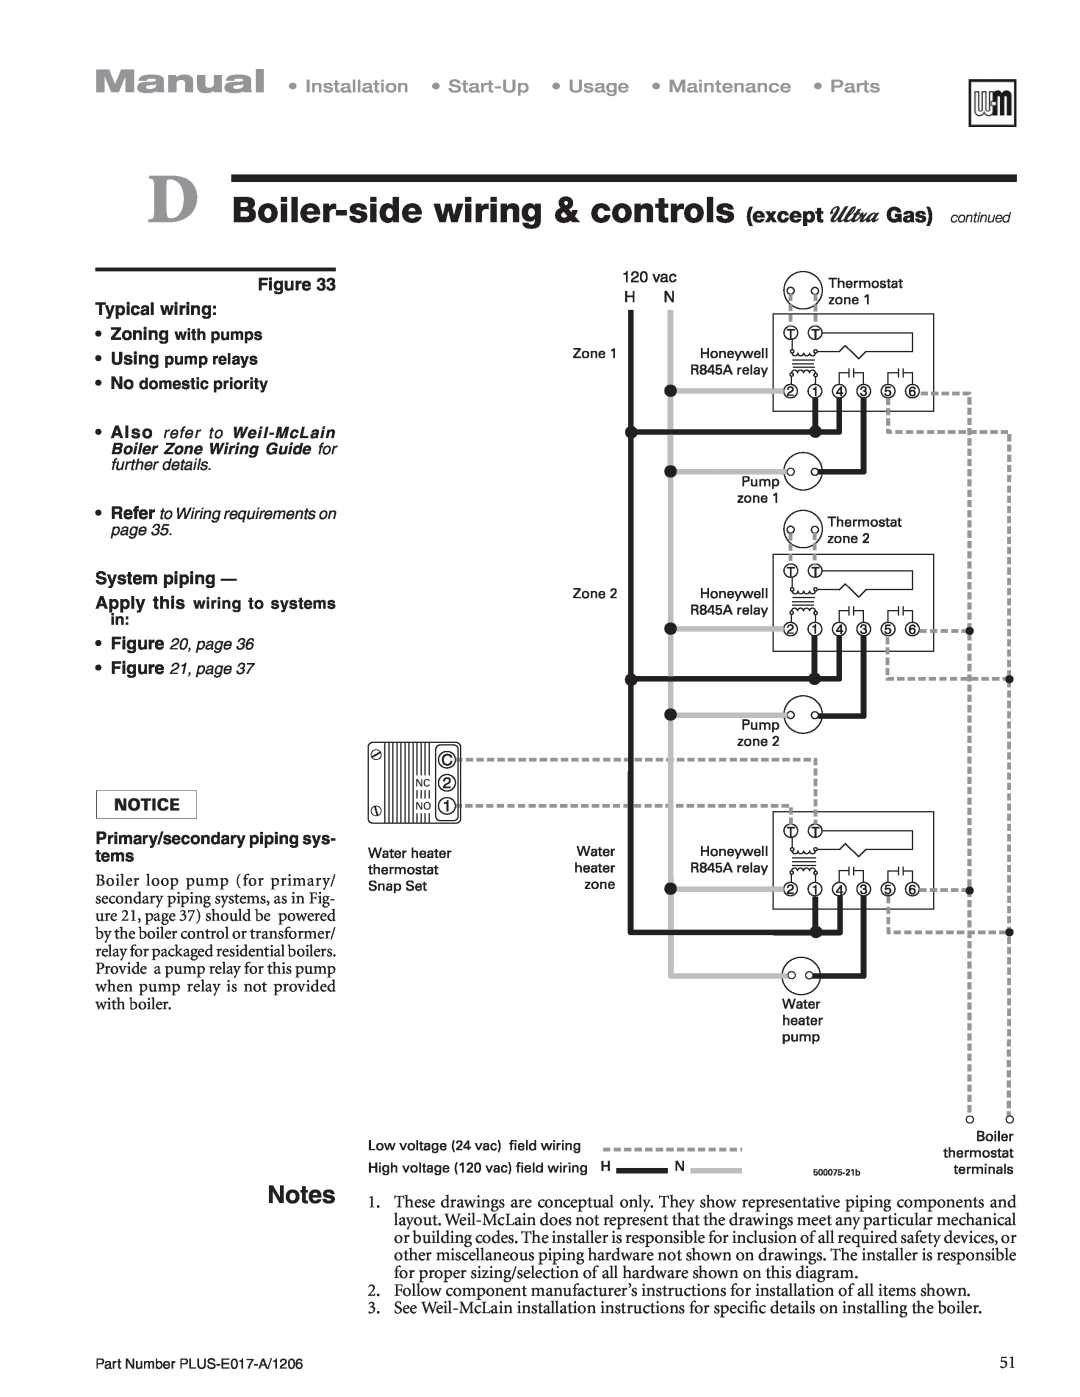 Weil-McLain PLUS-E017-A/1206 manual Figure Typical wiring, System piping, Primary/secondary piping sys- tems 